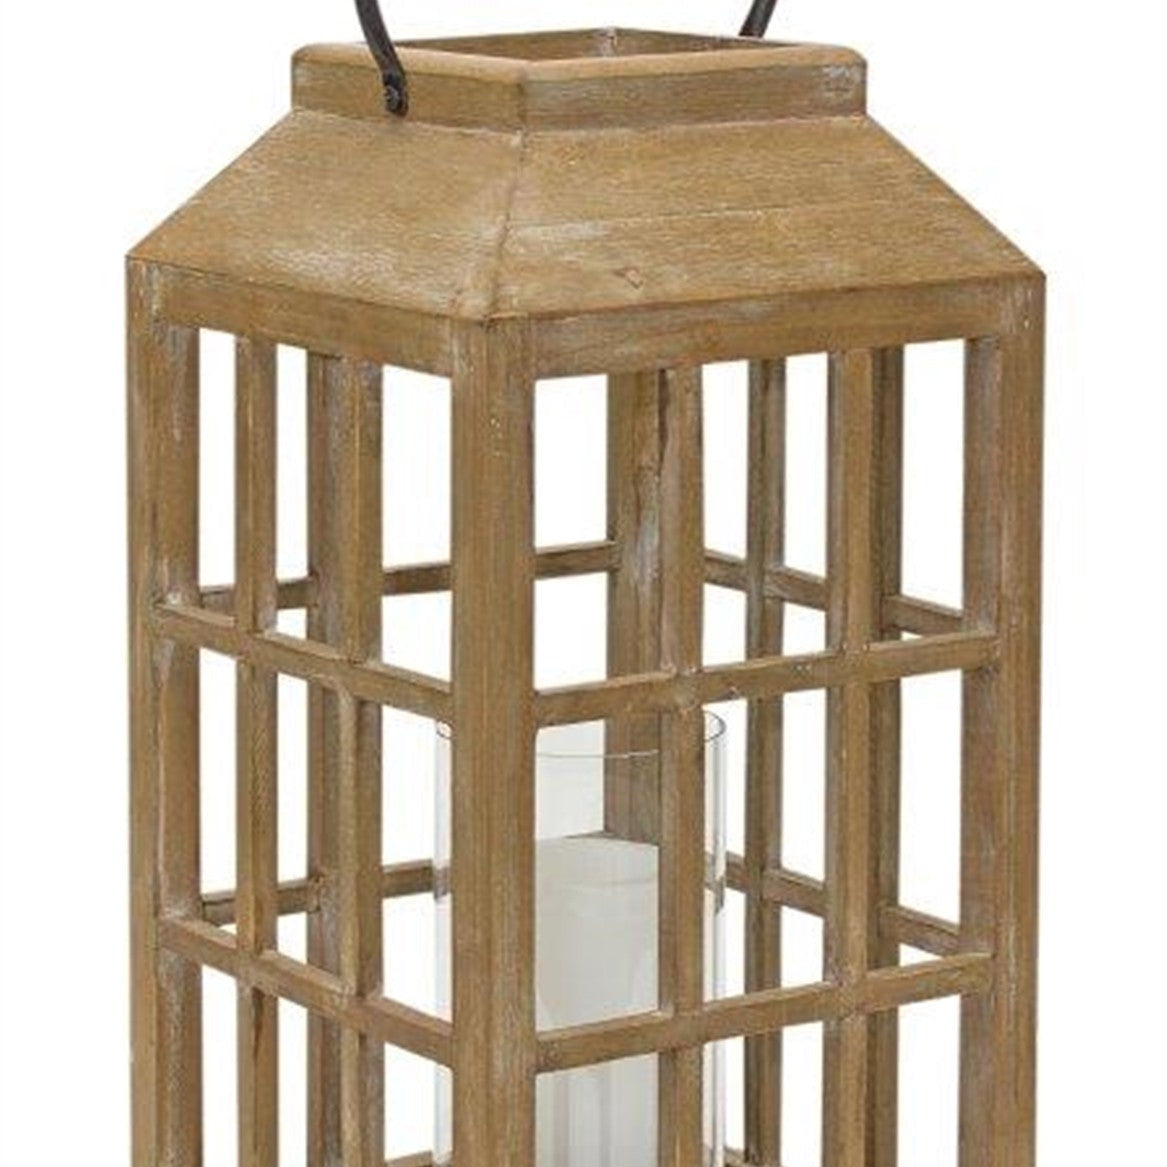 18" Black Flameless Floor Lantern Candle Holder - Tuesday Morning-Candle Holders